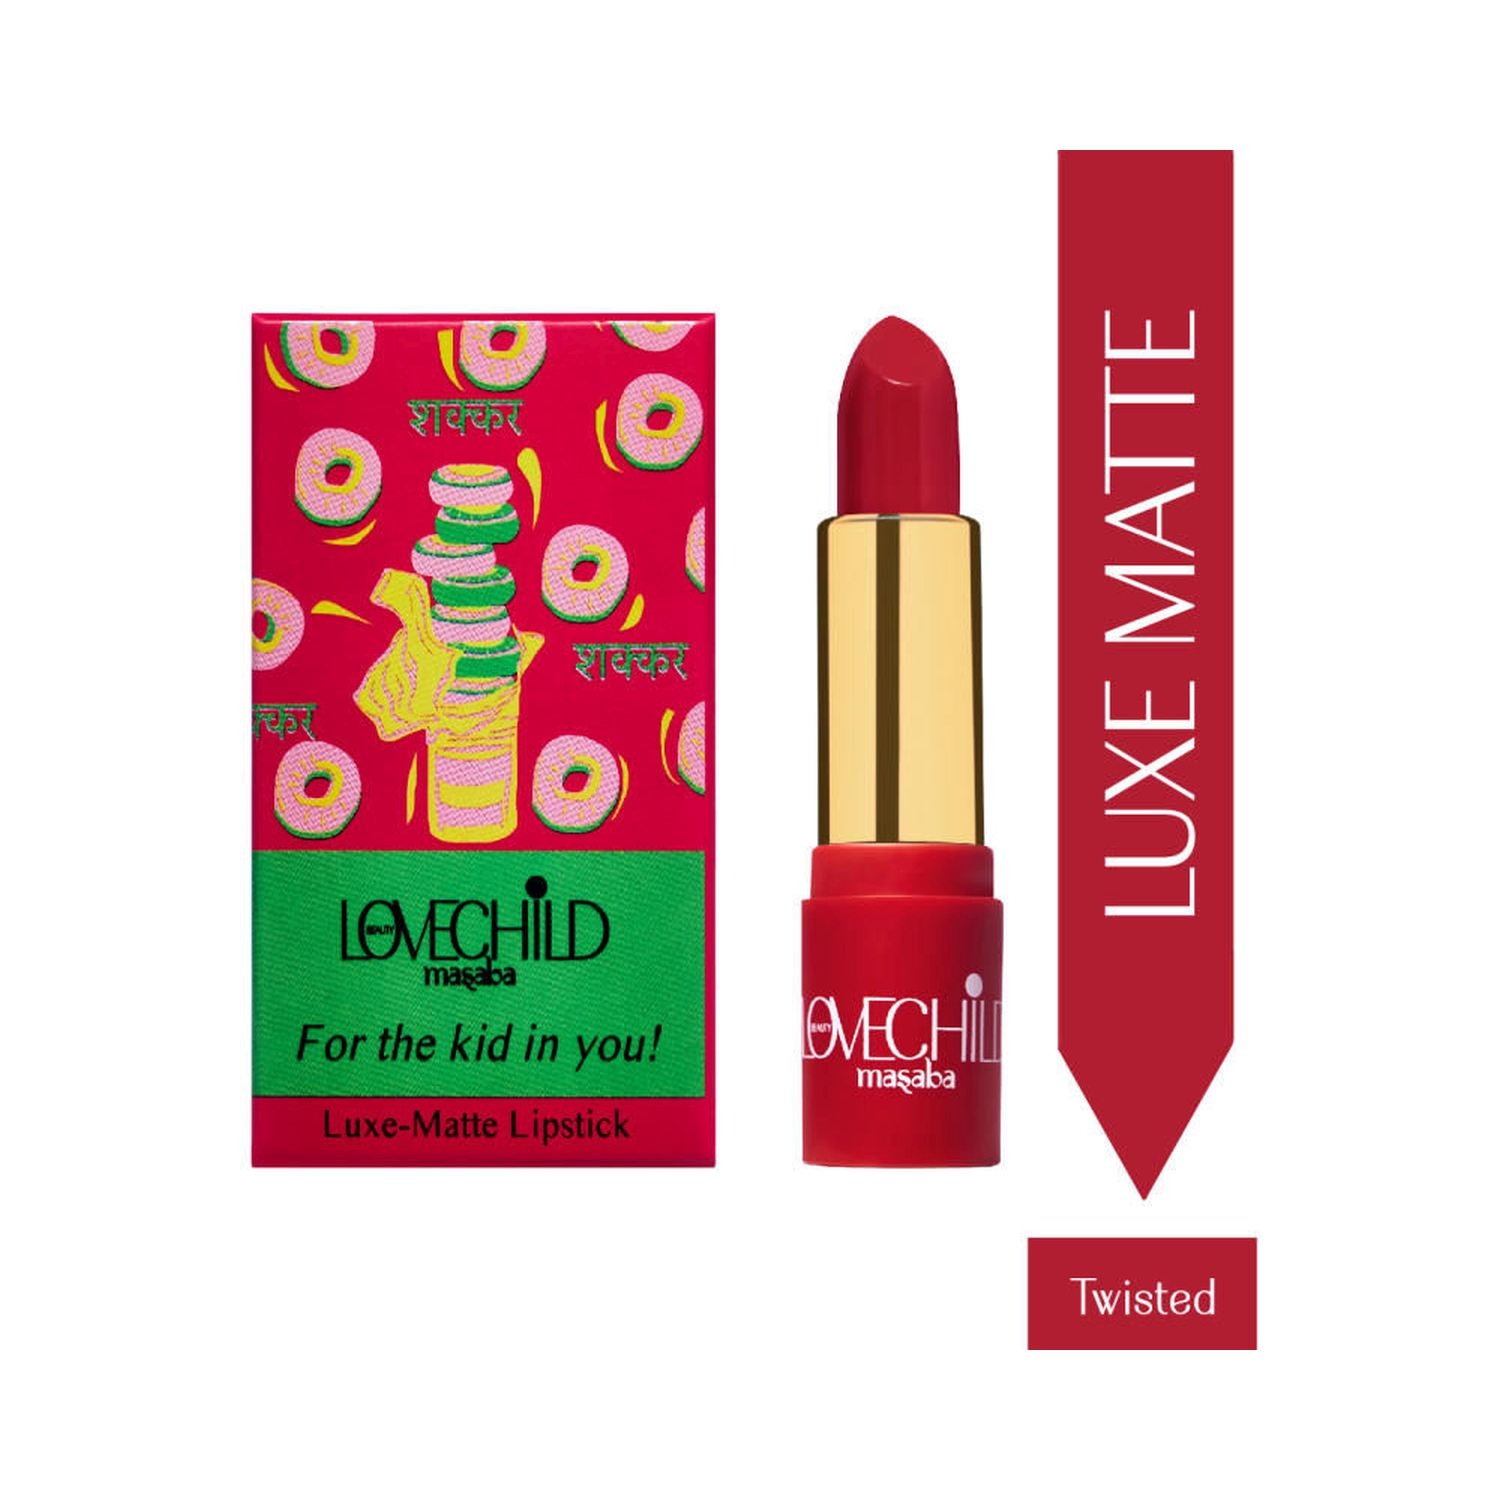 LoveChild Masaba | LoveChild Masaba For The Kid In You! Luxe Matte Lipstick - 10 Twisted (4g)